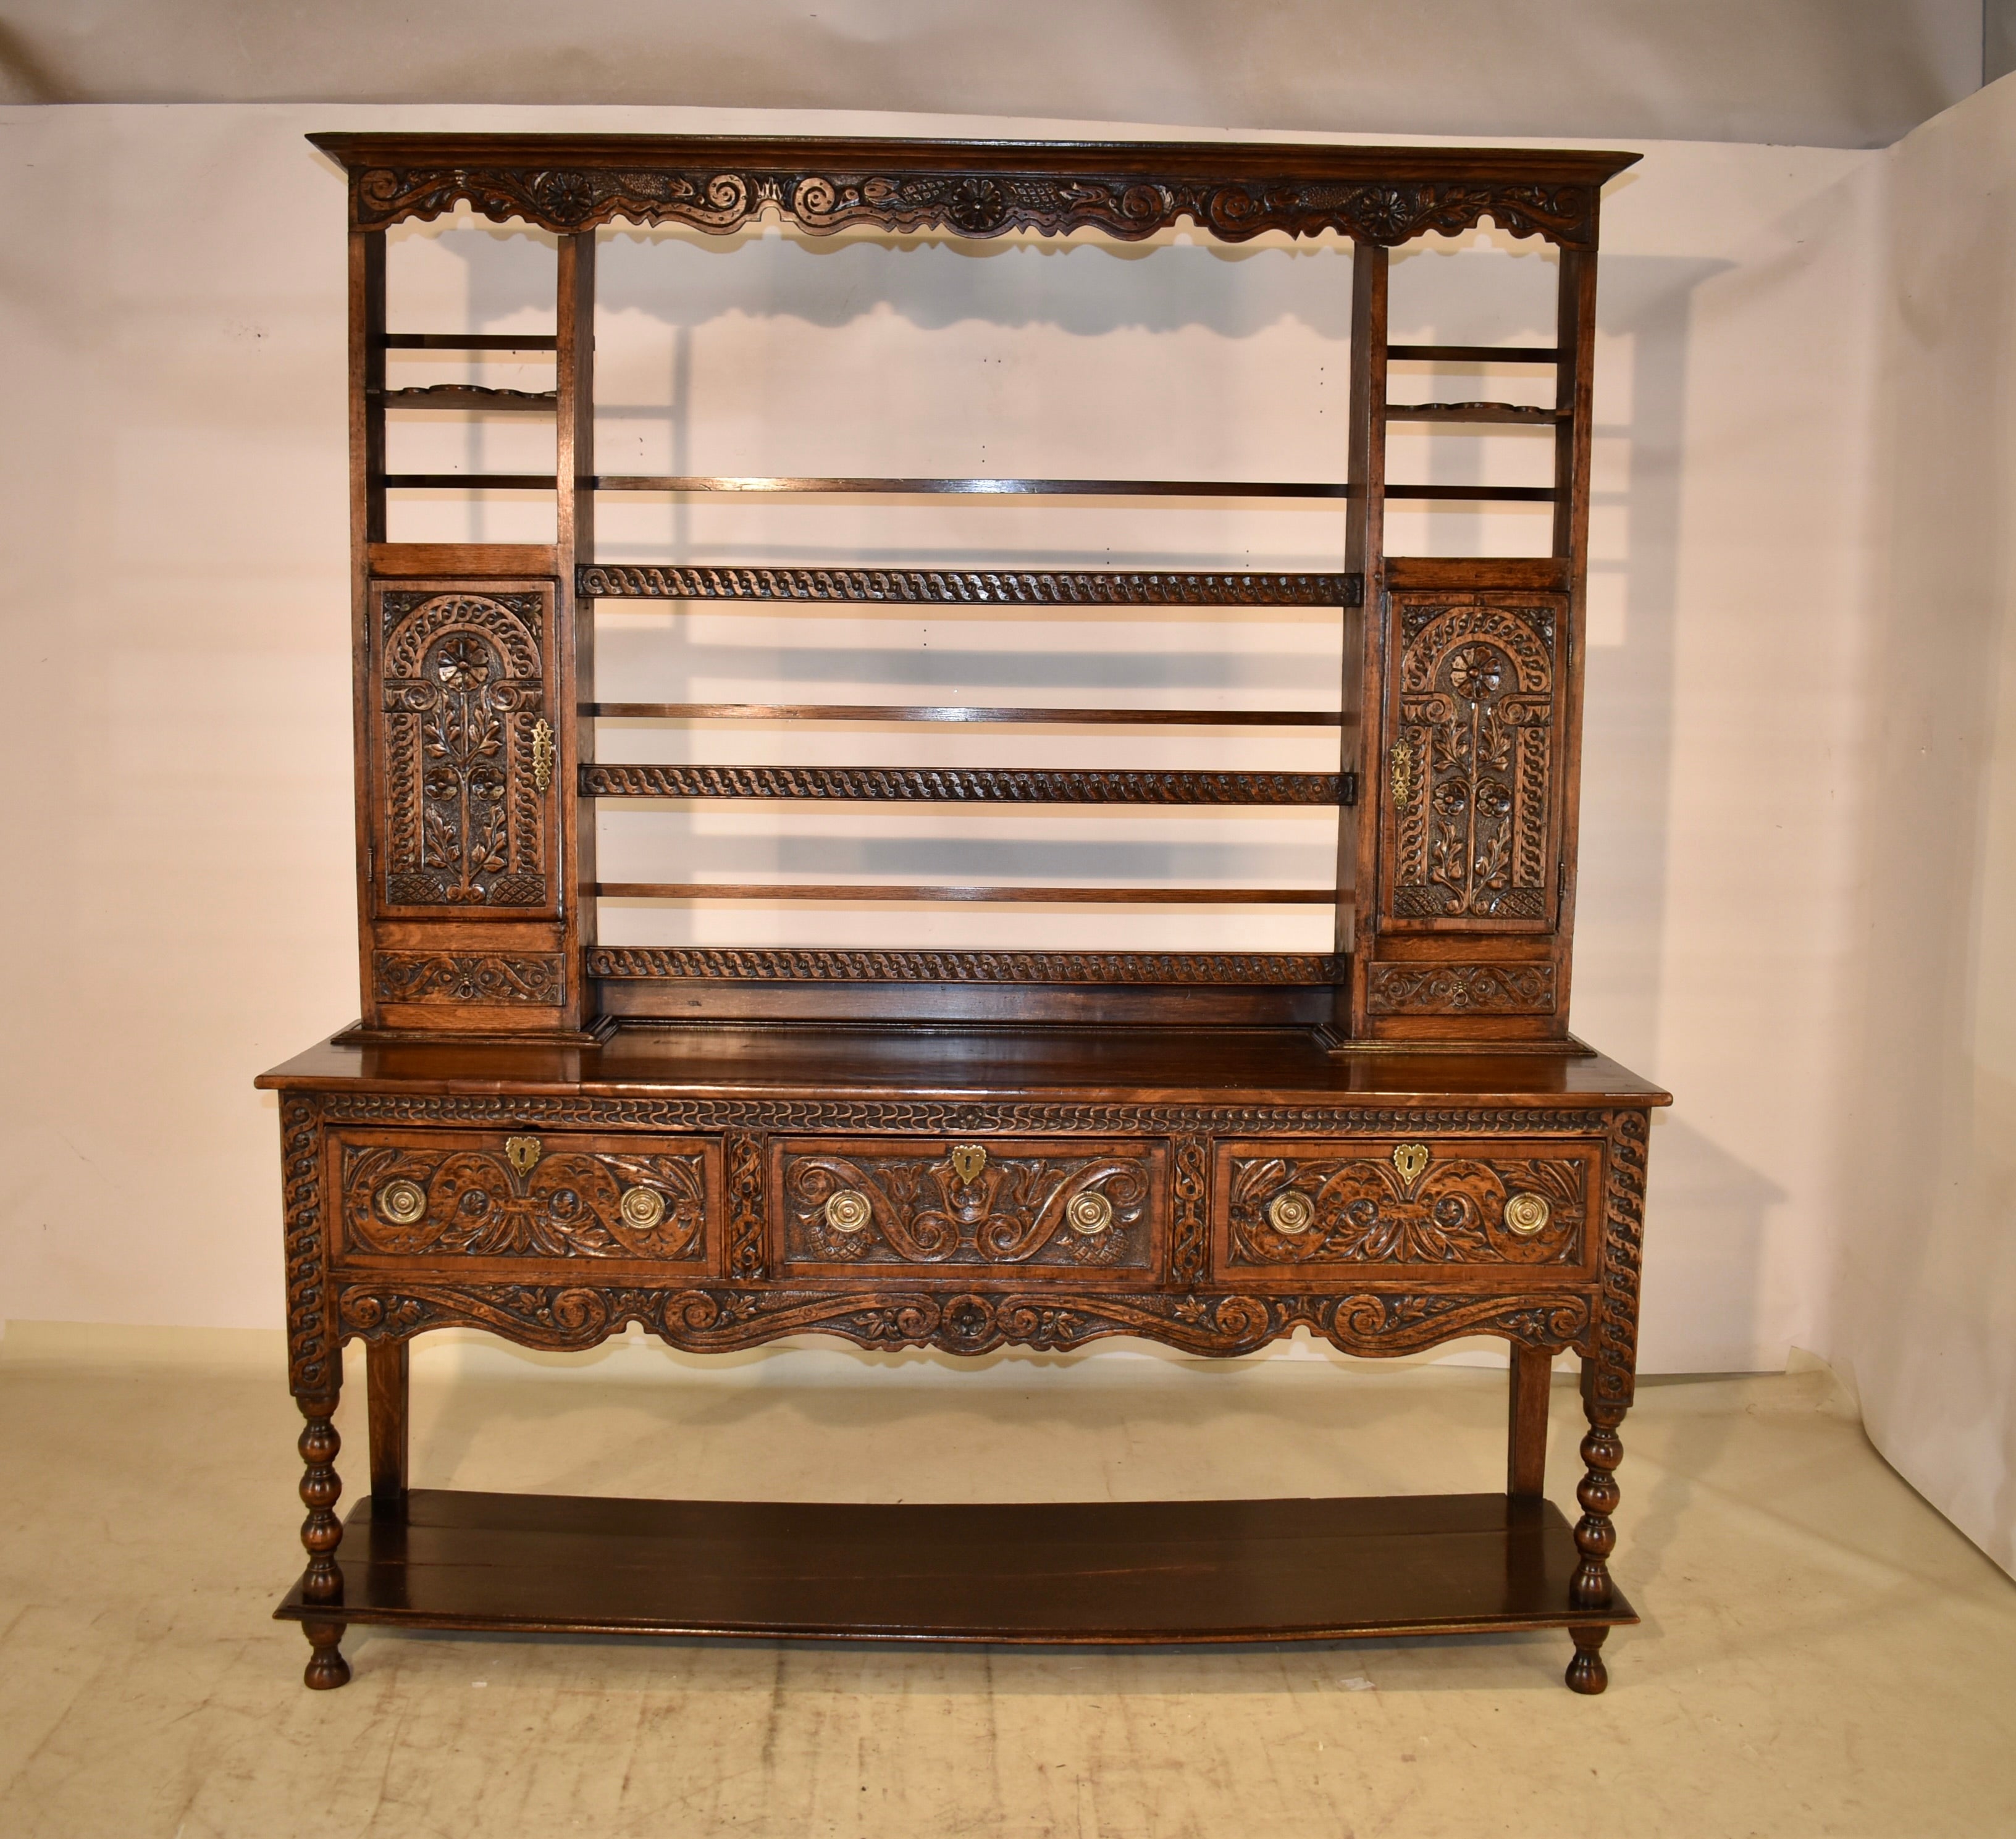 18th century Welsh dresser made from oak.  The top has a lovely crown molding over a scalloped frieze, which is highly carved with lovely decoration.  The back of the dresser has open shelving, with rails along the back, and hand carved shelf